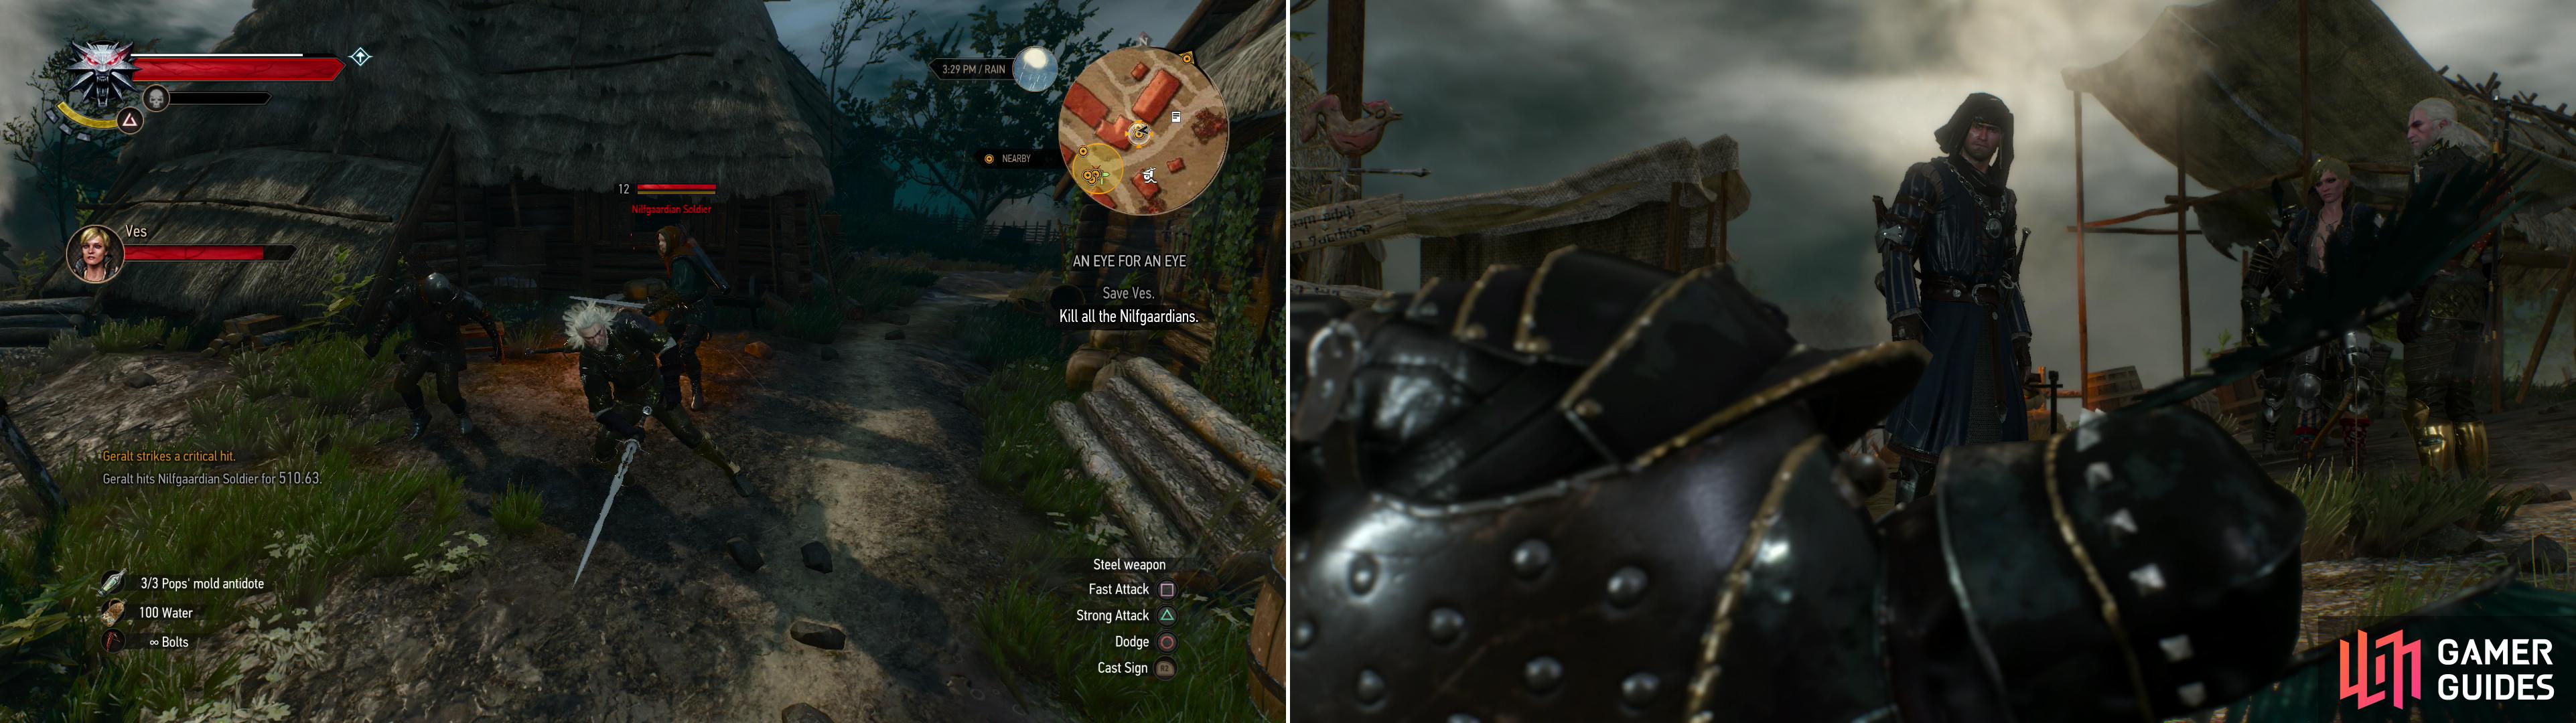 Eye for an Eye and the Eyeless - Novigrad - Walkthrough The Witcher 3: Wild Hunt | Gamer Guides®